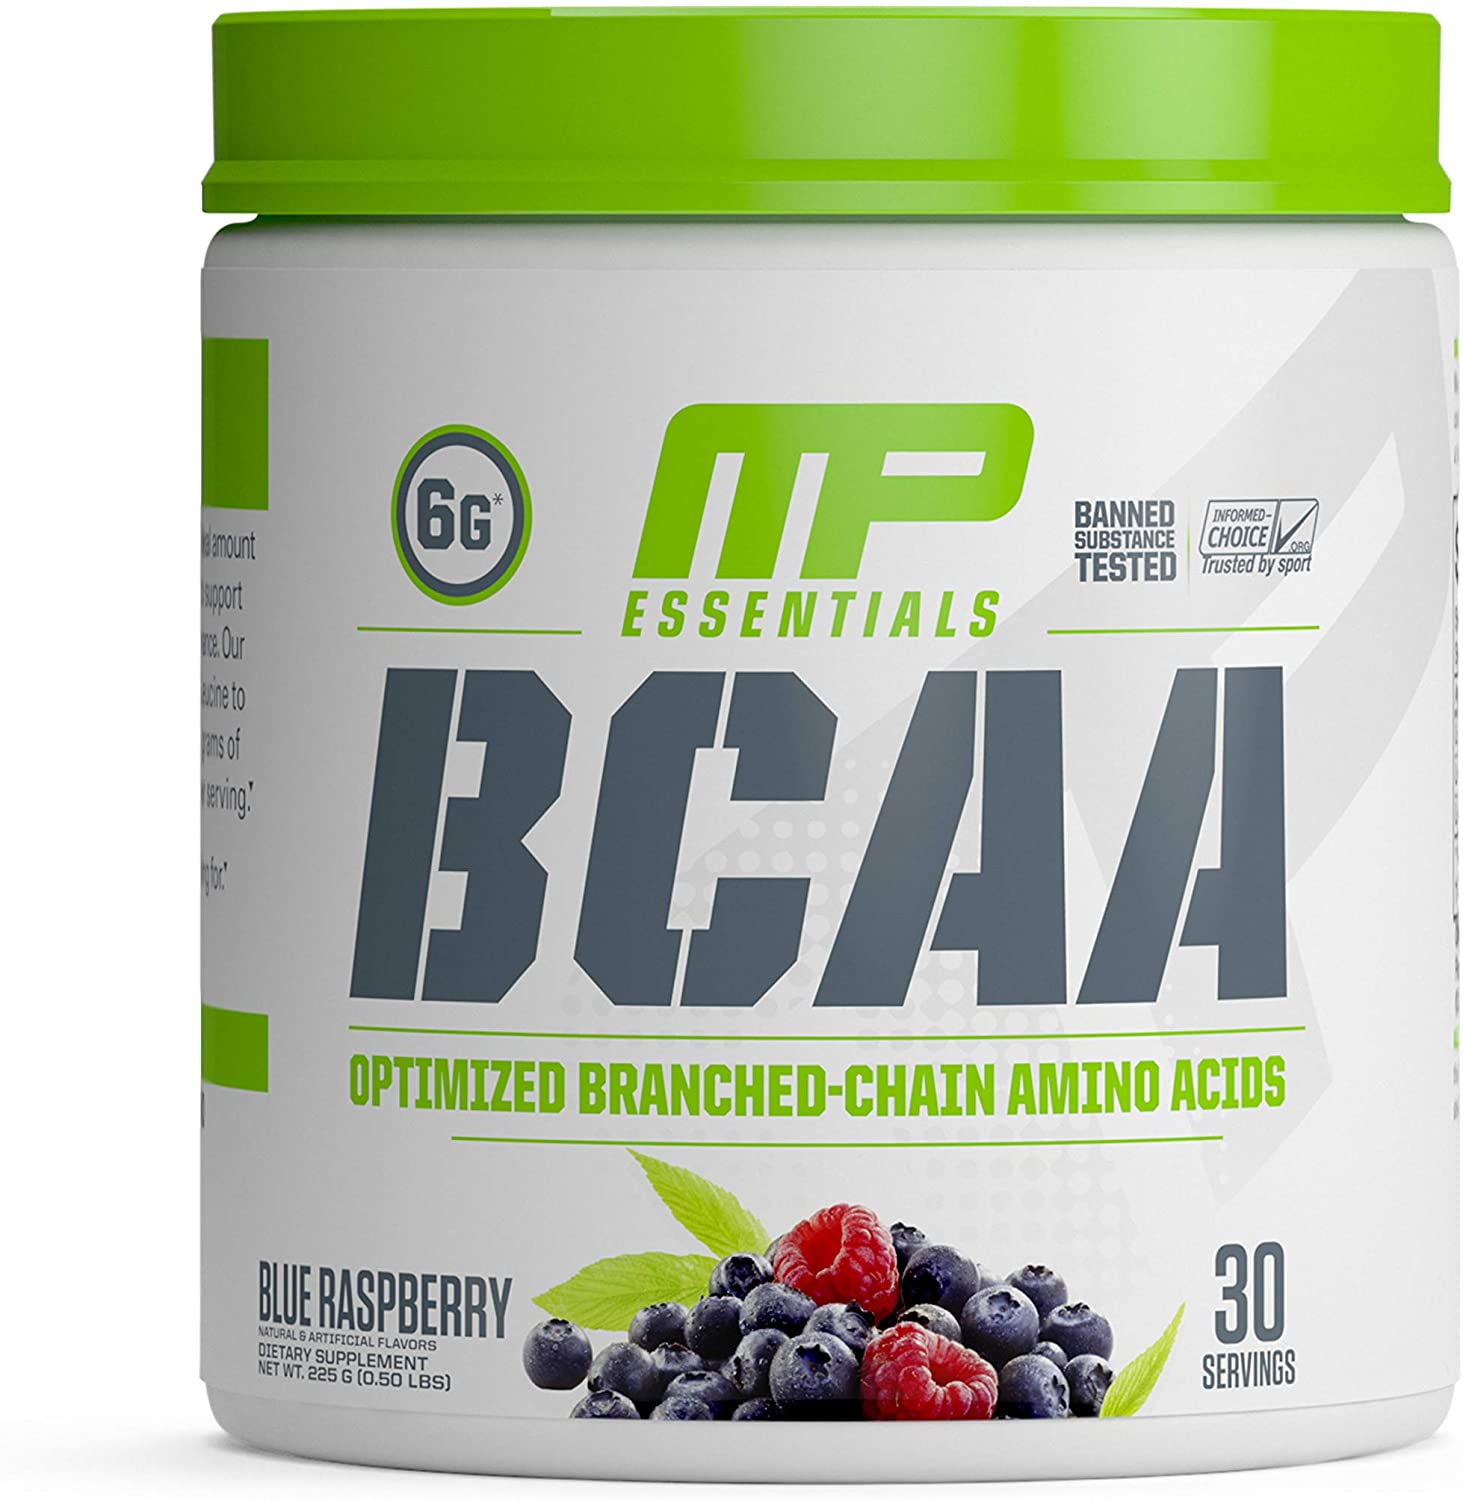 Ranking the best BCAAs of 2021